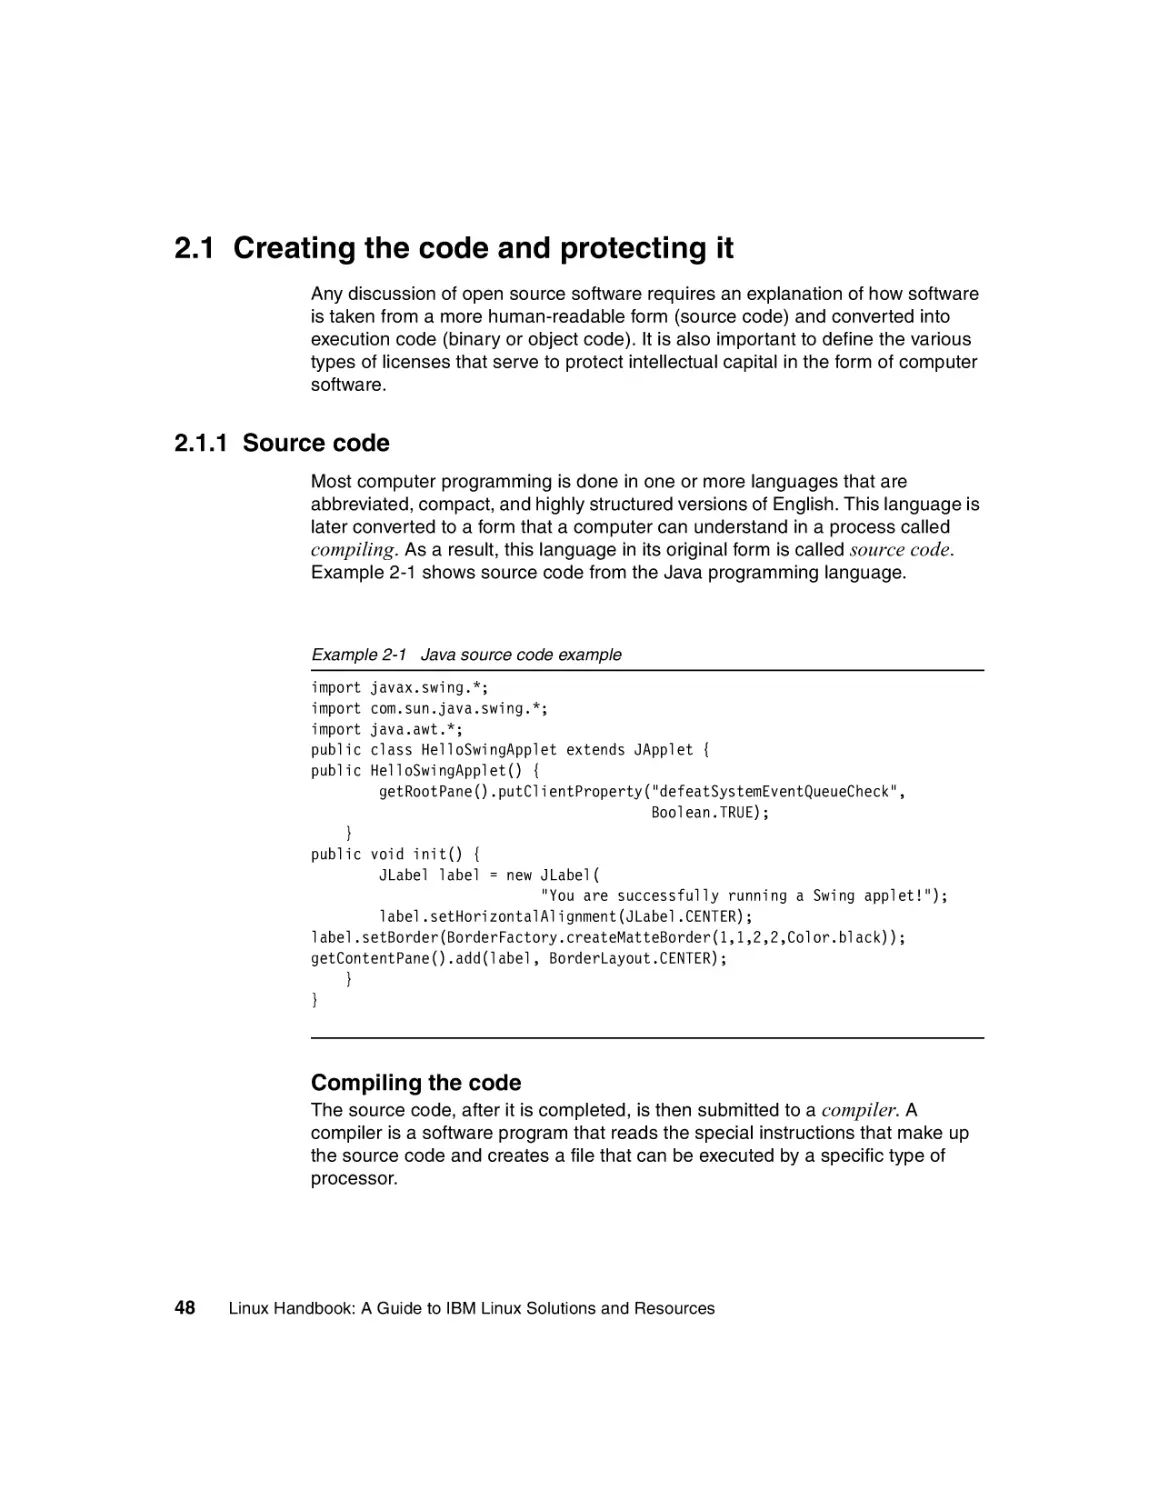 2.1 Creating the code and protecting it
2.1.1 Source code